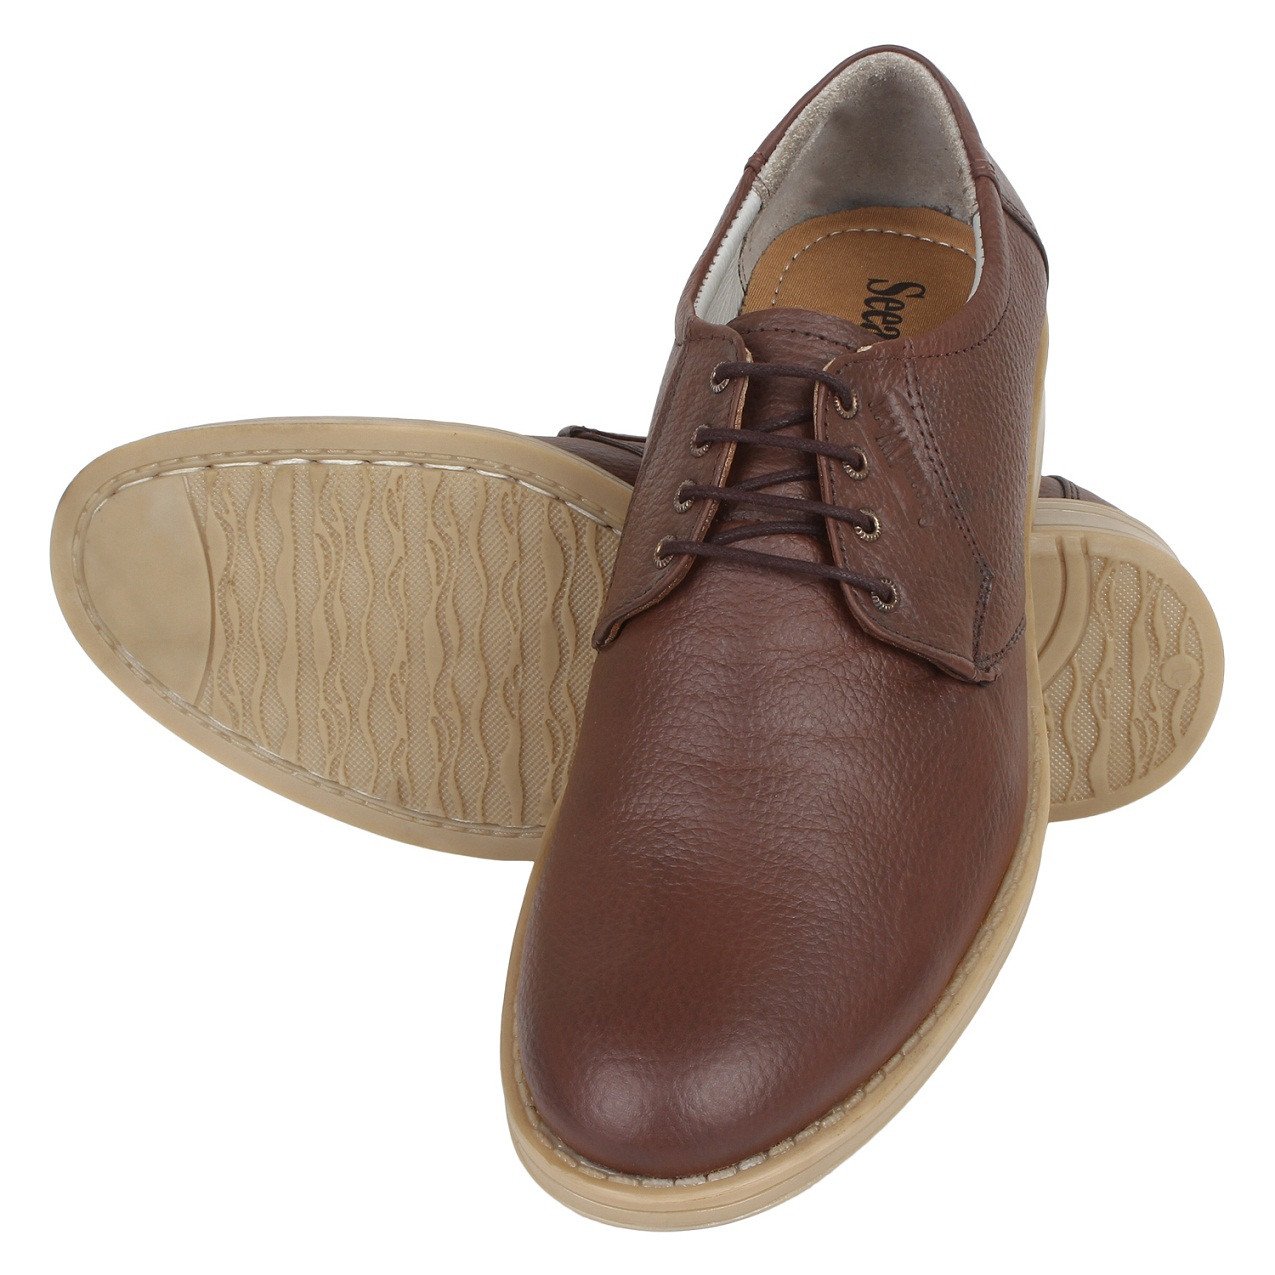 SeeandWear Formal Shoes For Men. Branded Leather Shoes Brown Colour - Minor Defect - SeeandWear